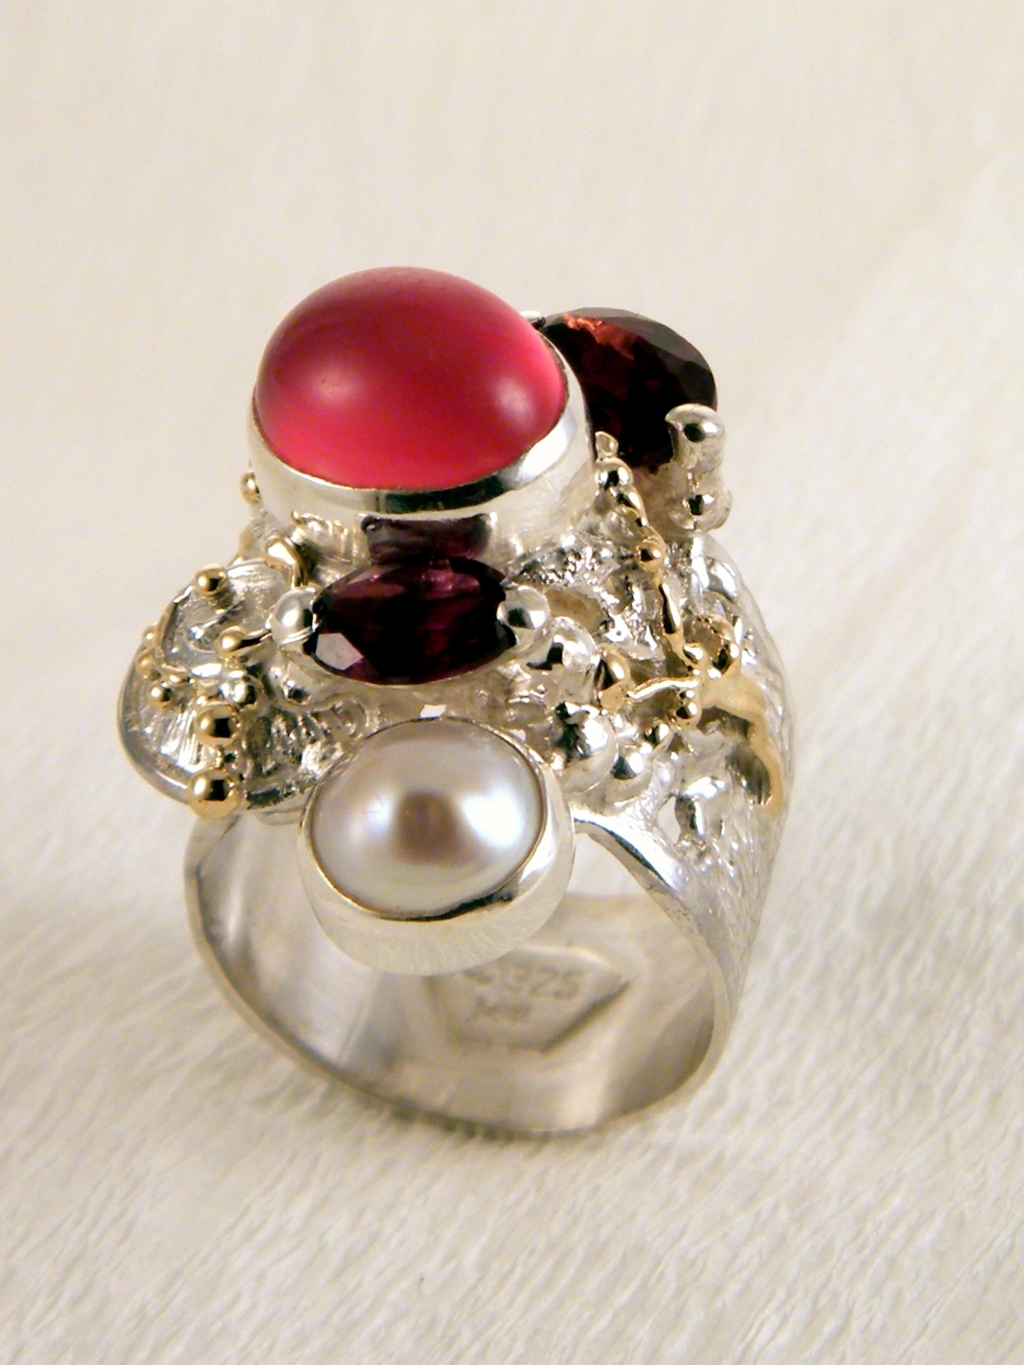 Gregory Pyra Piro Band Ring #6271 in Sterling Silver and 14k Gold with Garnet, Moonstone, and Pearl